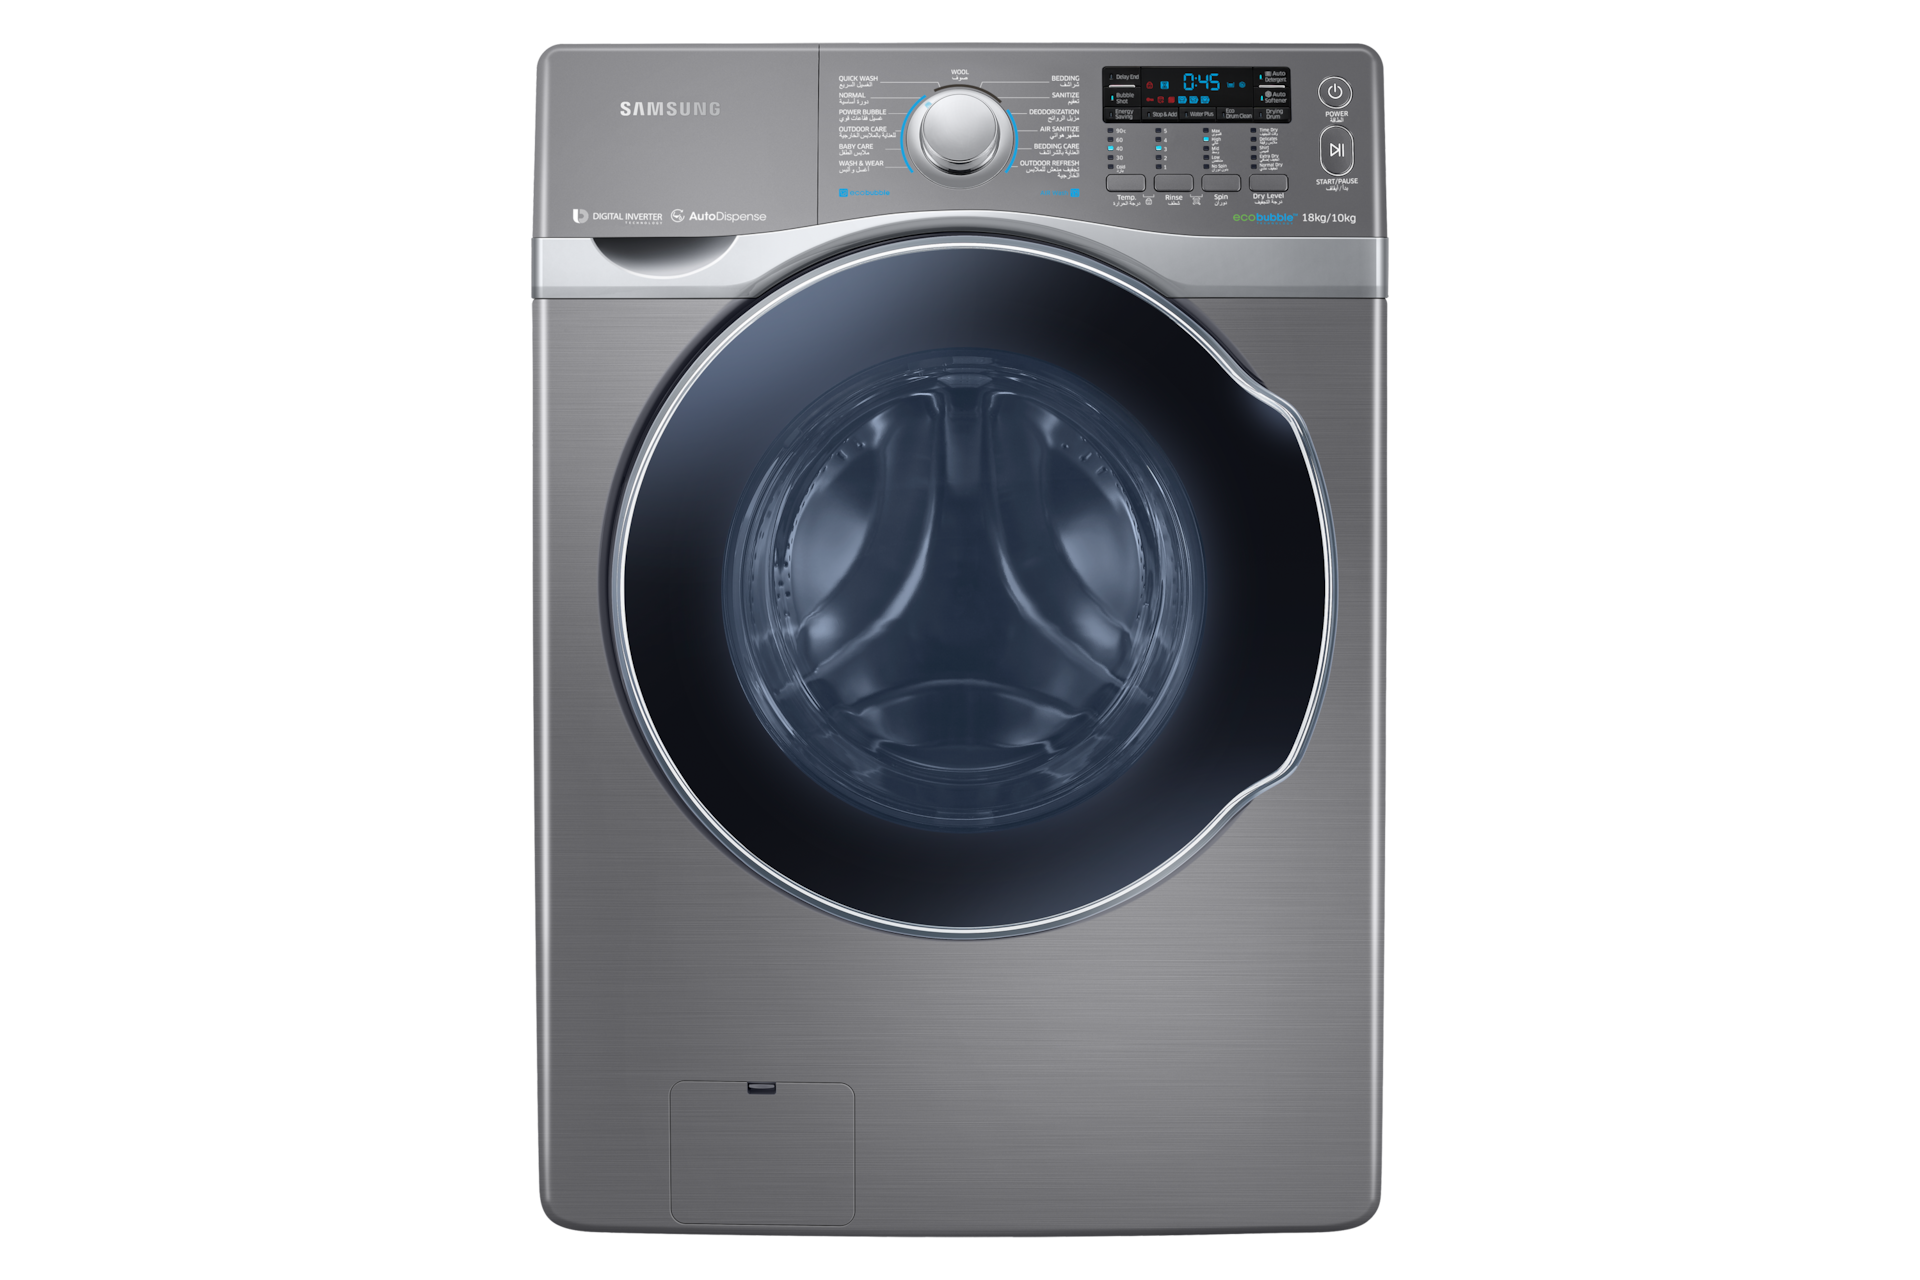 Buy Washer Dryer With Ecobubble 18kg Samsung Levant